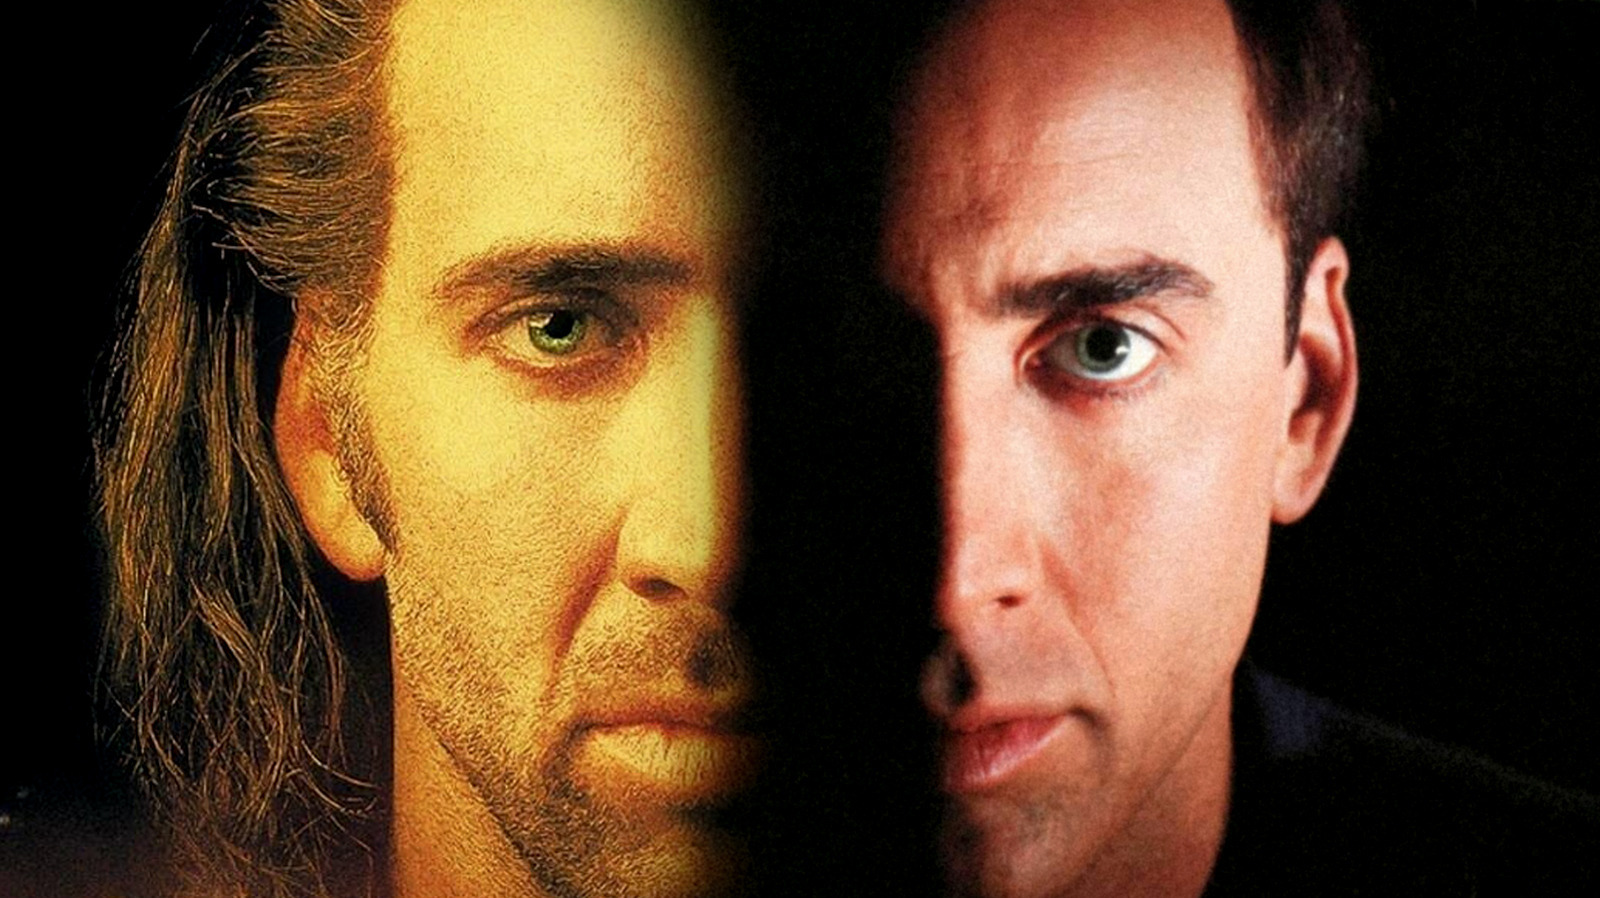 #Nic Cage Battled Nic Cage In The Summer Of ’97